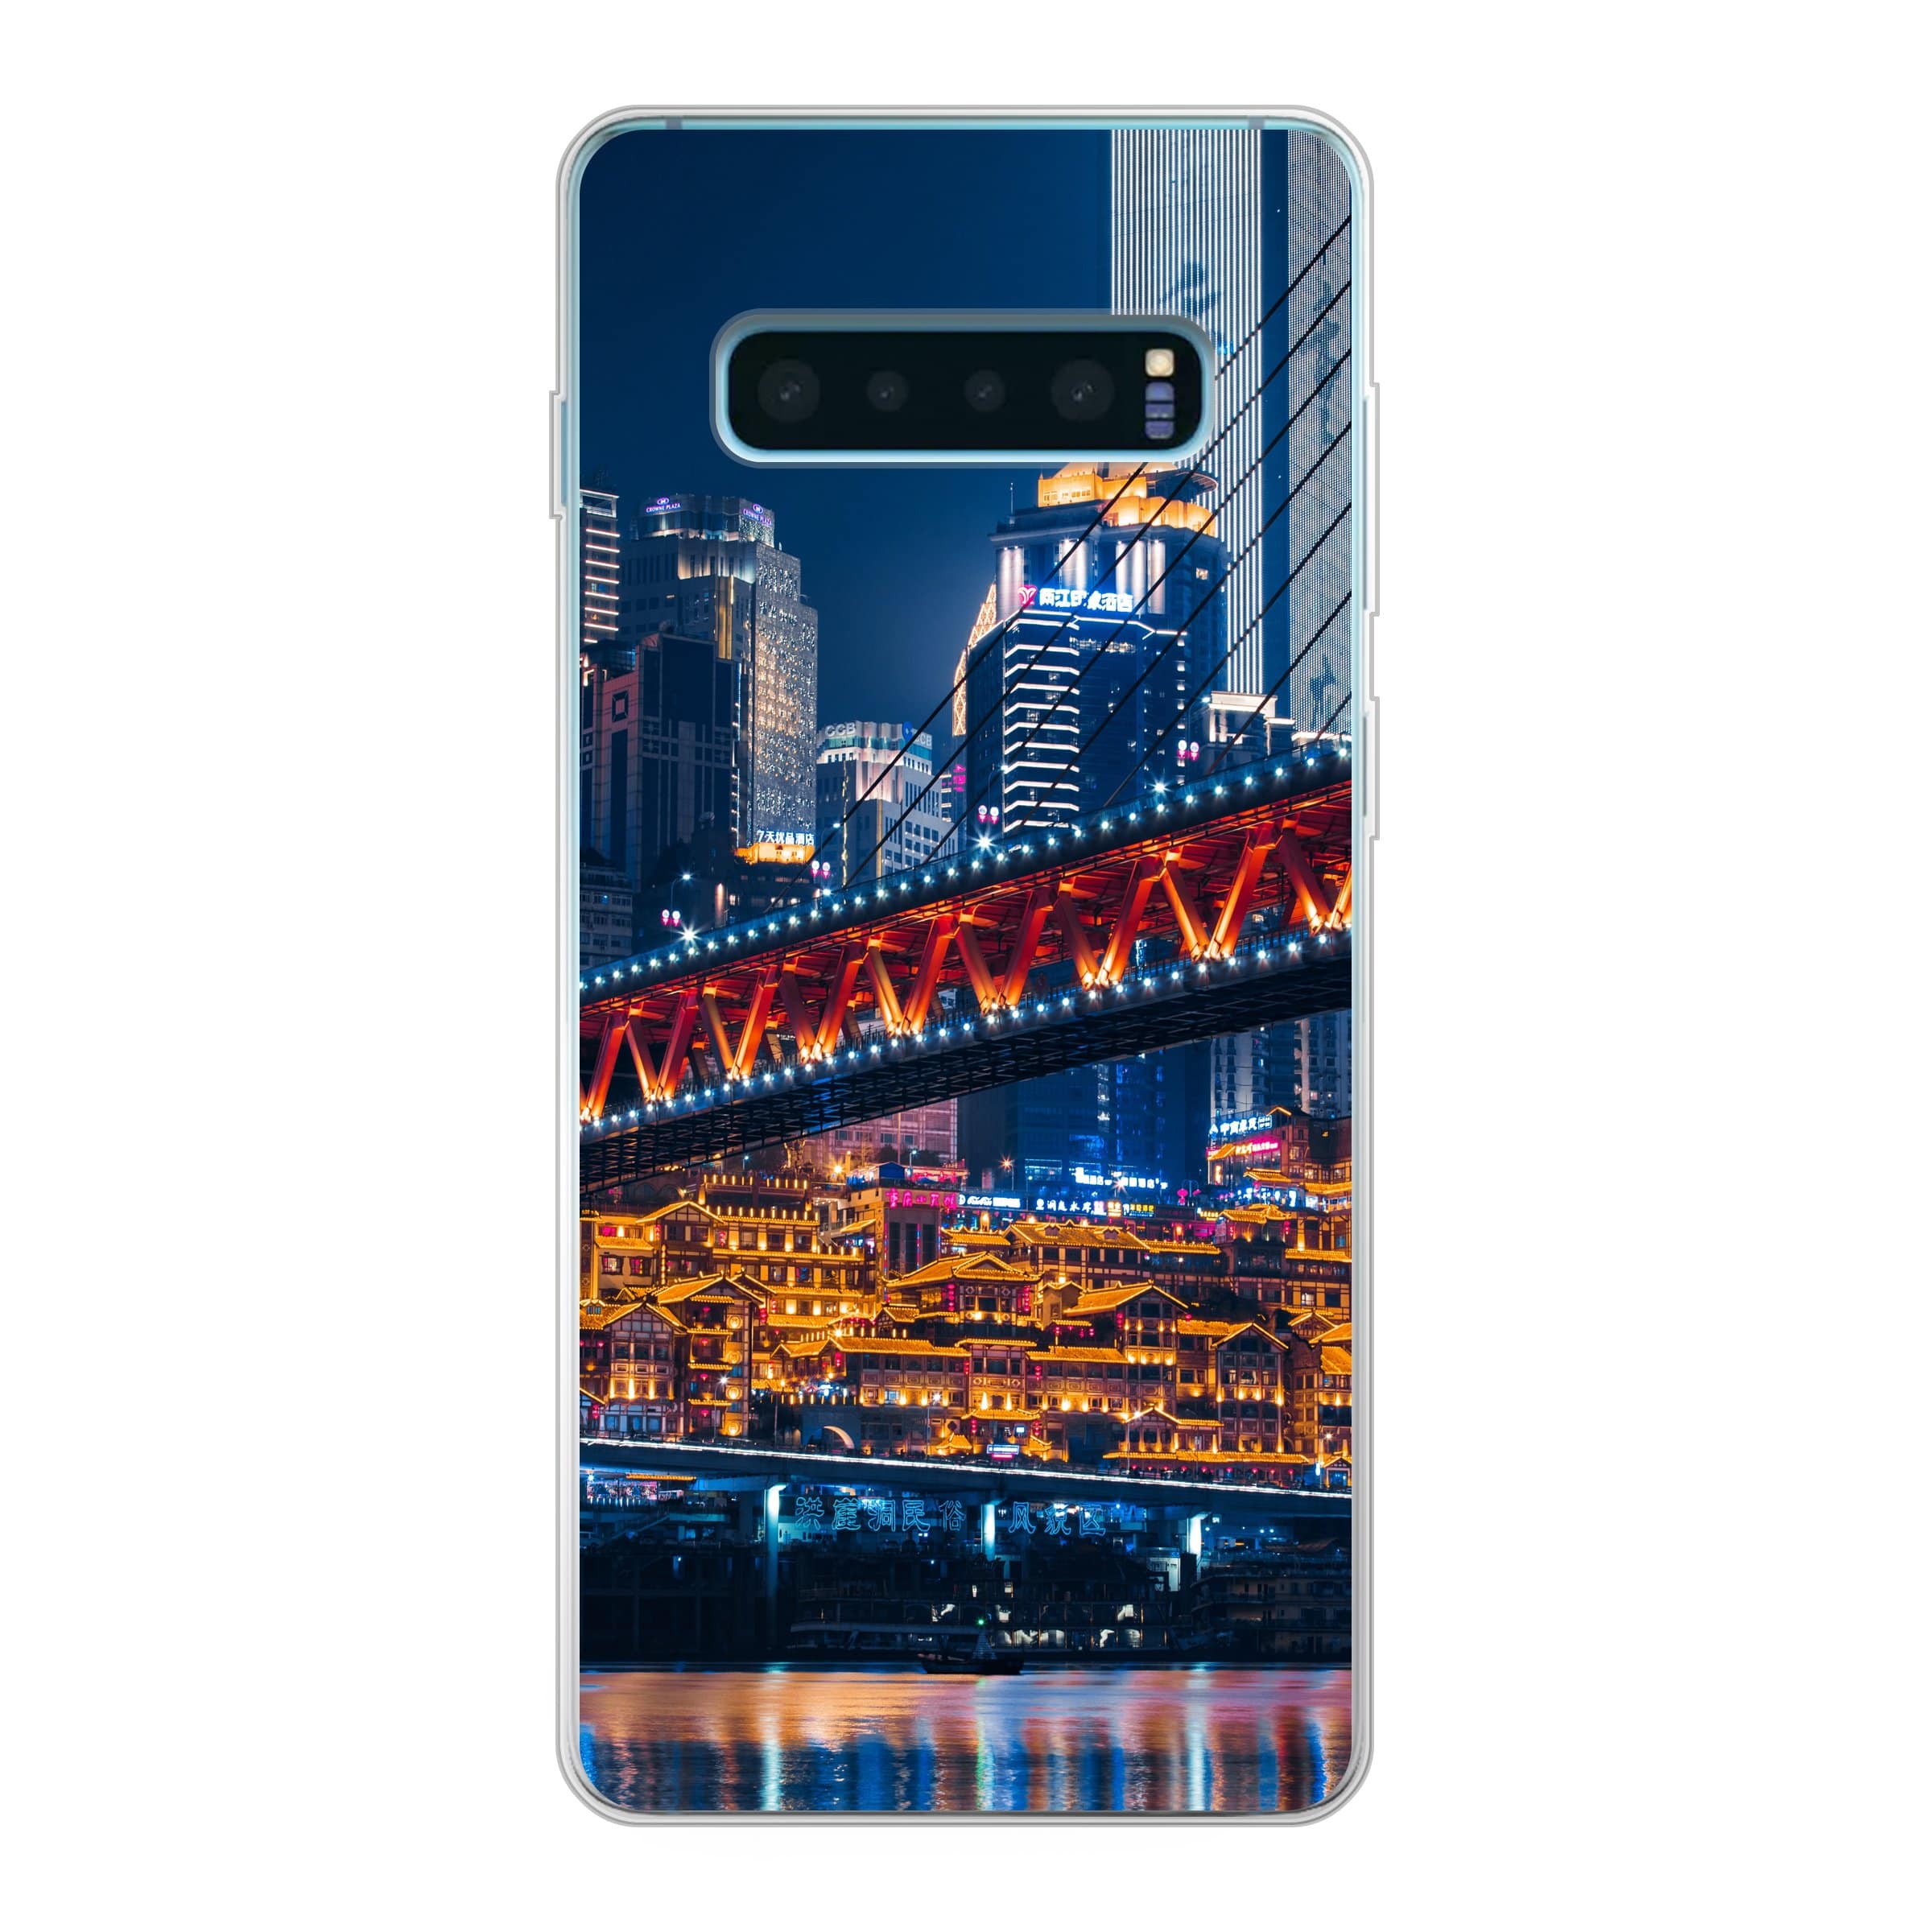 Personalised Samsung Galaxy S10 Plus Soft Phone Case